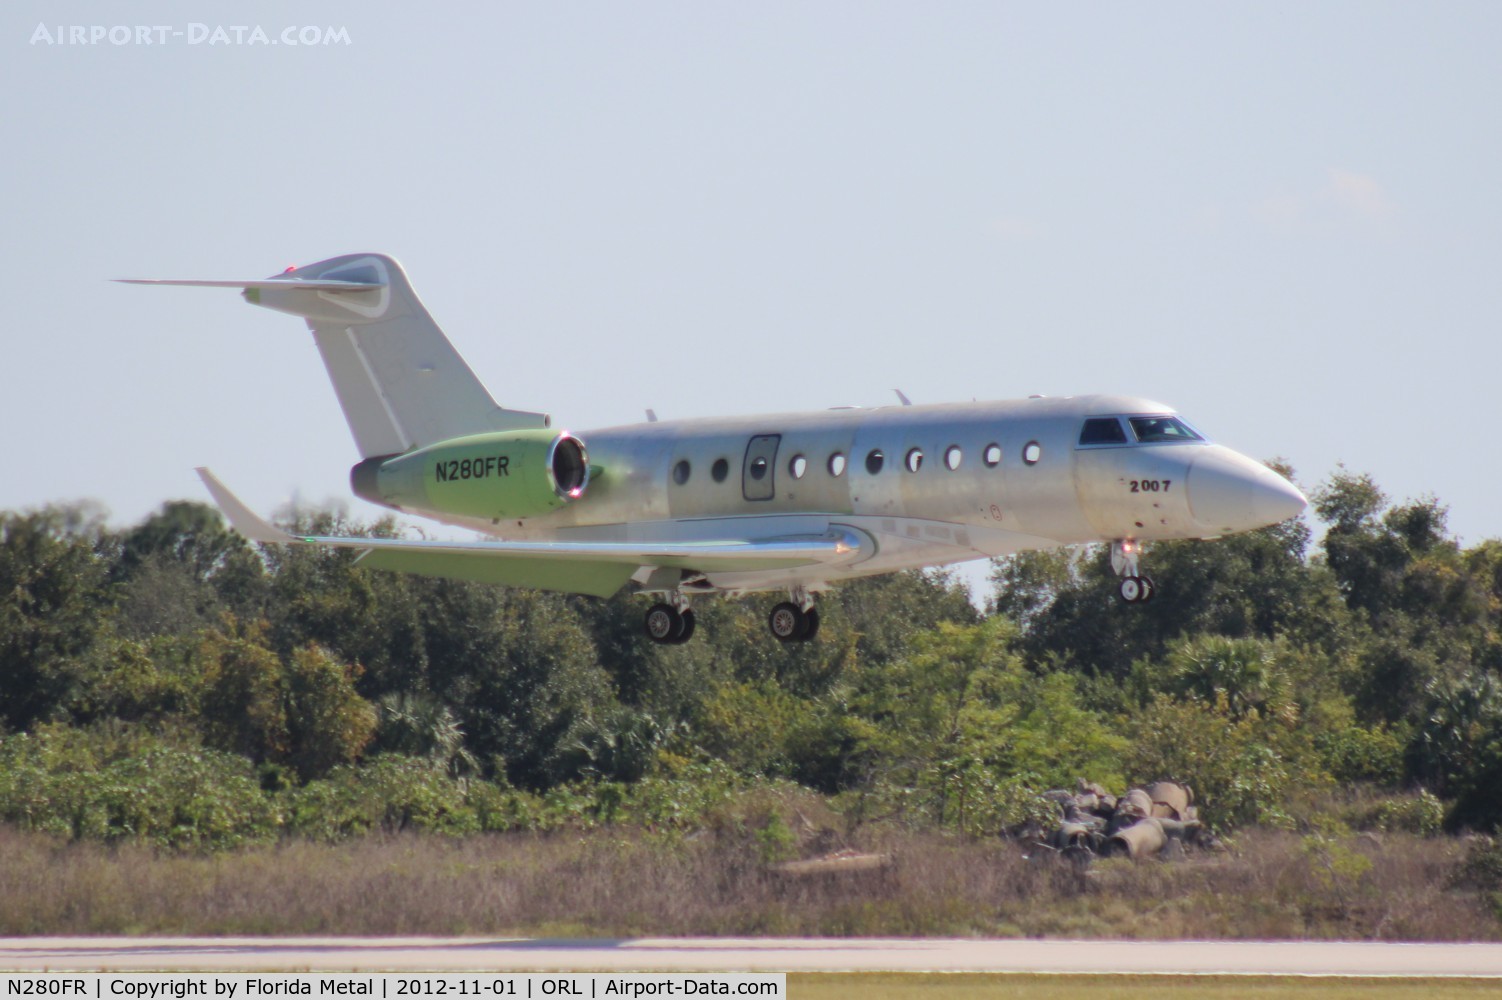 N280FR, 2012 Israel Aircraft Industries Gulfstream G280 C/N 2007, Unpainted new G280 returning from time trials